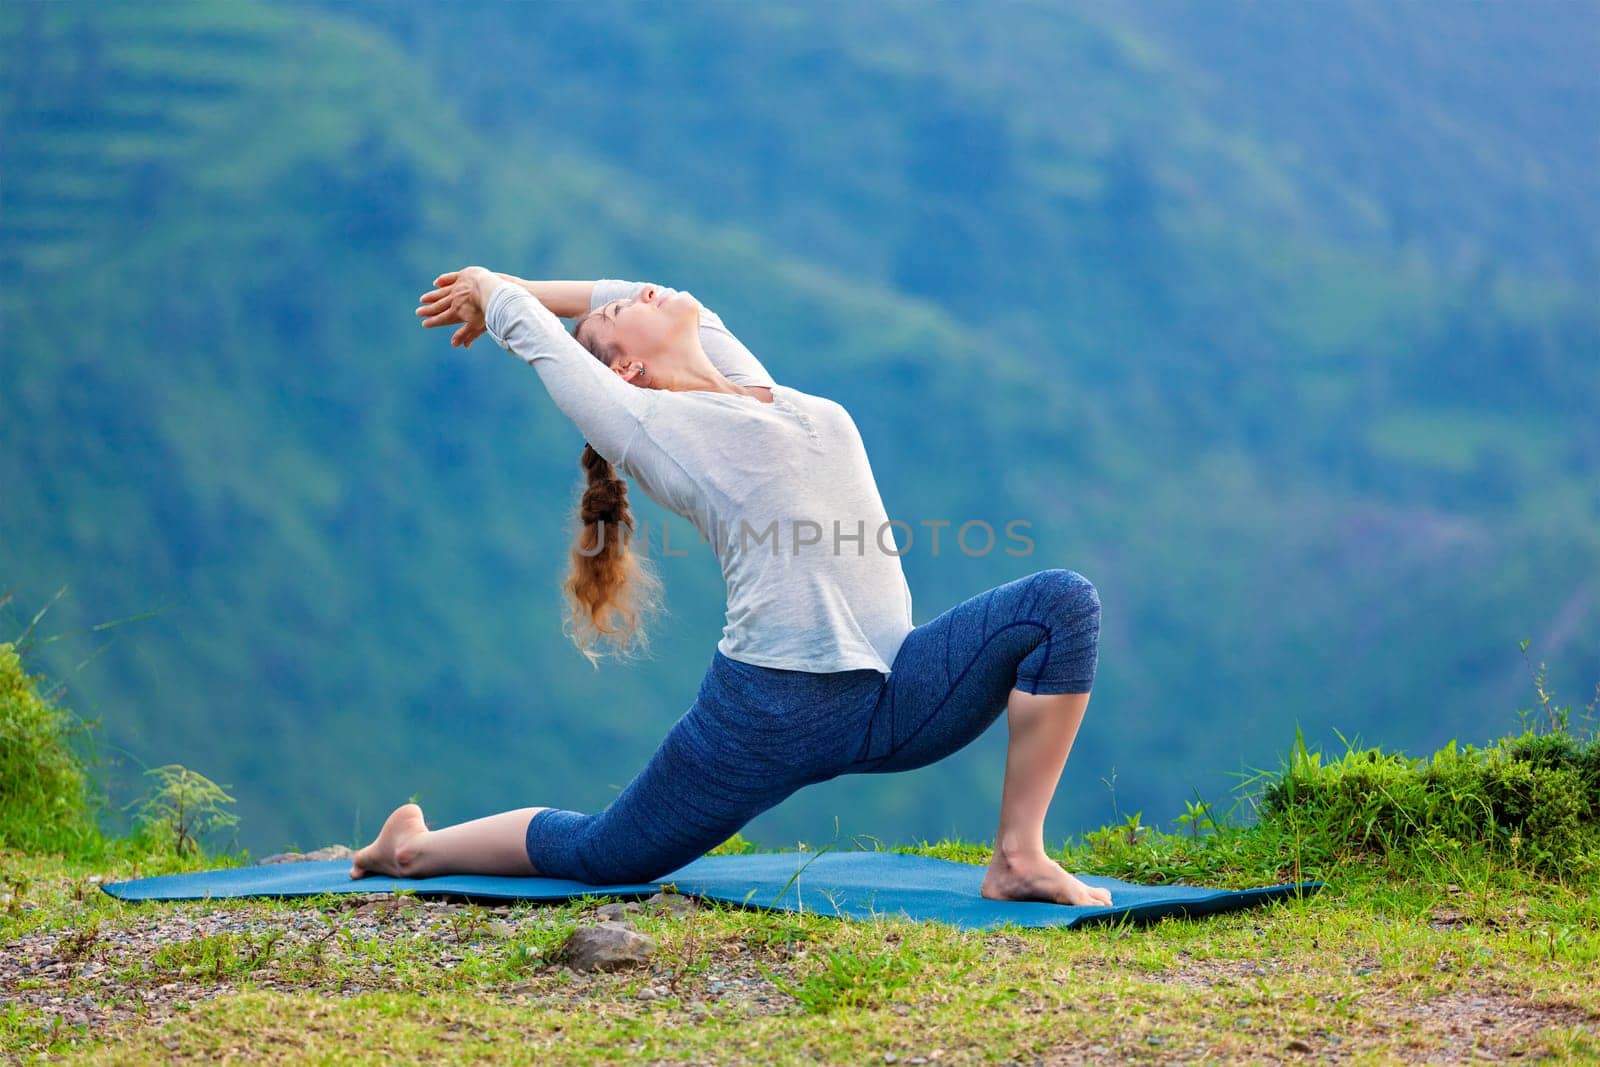 Yoga outdoors - sporty fit woman practices Hatha yoga asana Anjaneyasana - low crescent lunge pose posture outdoors in Himalayas mountains